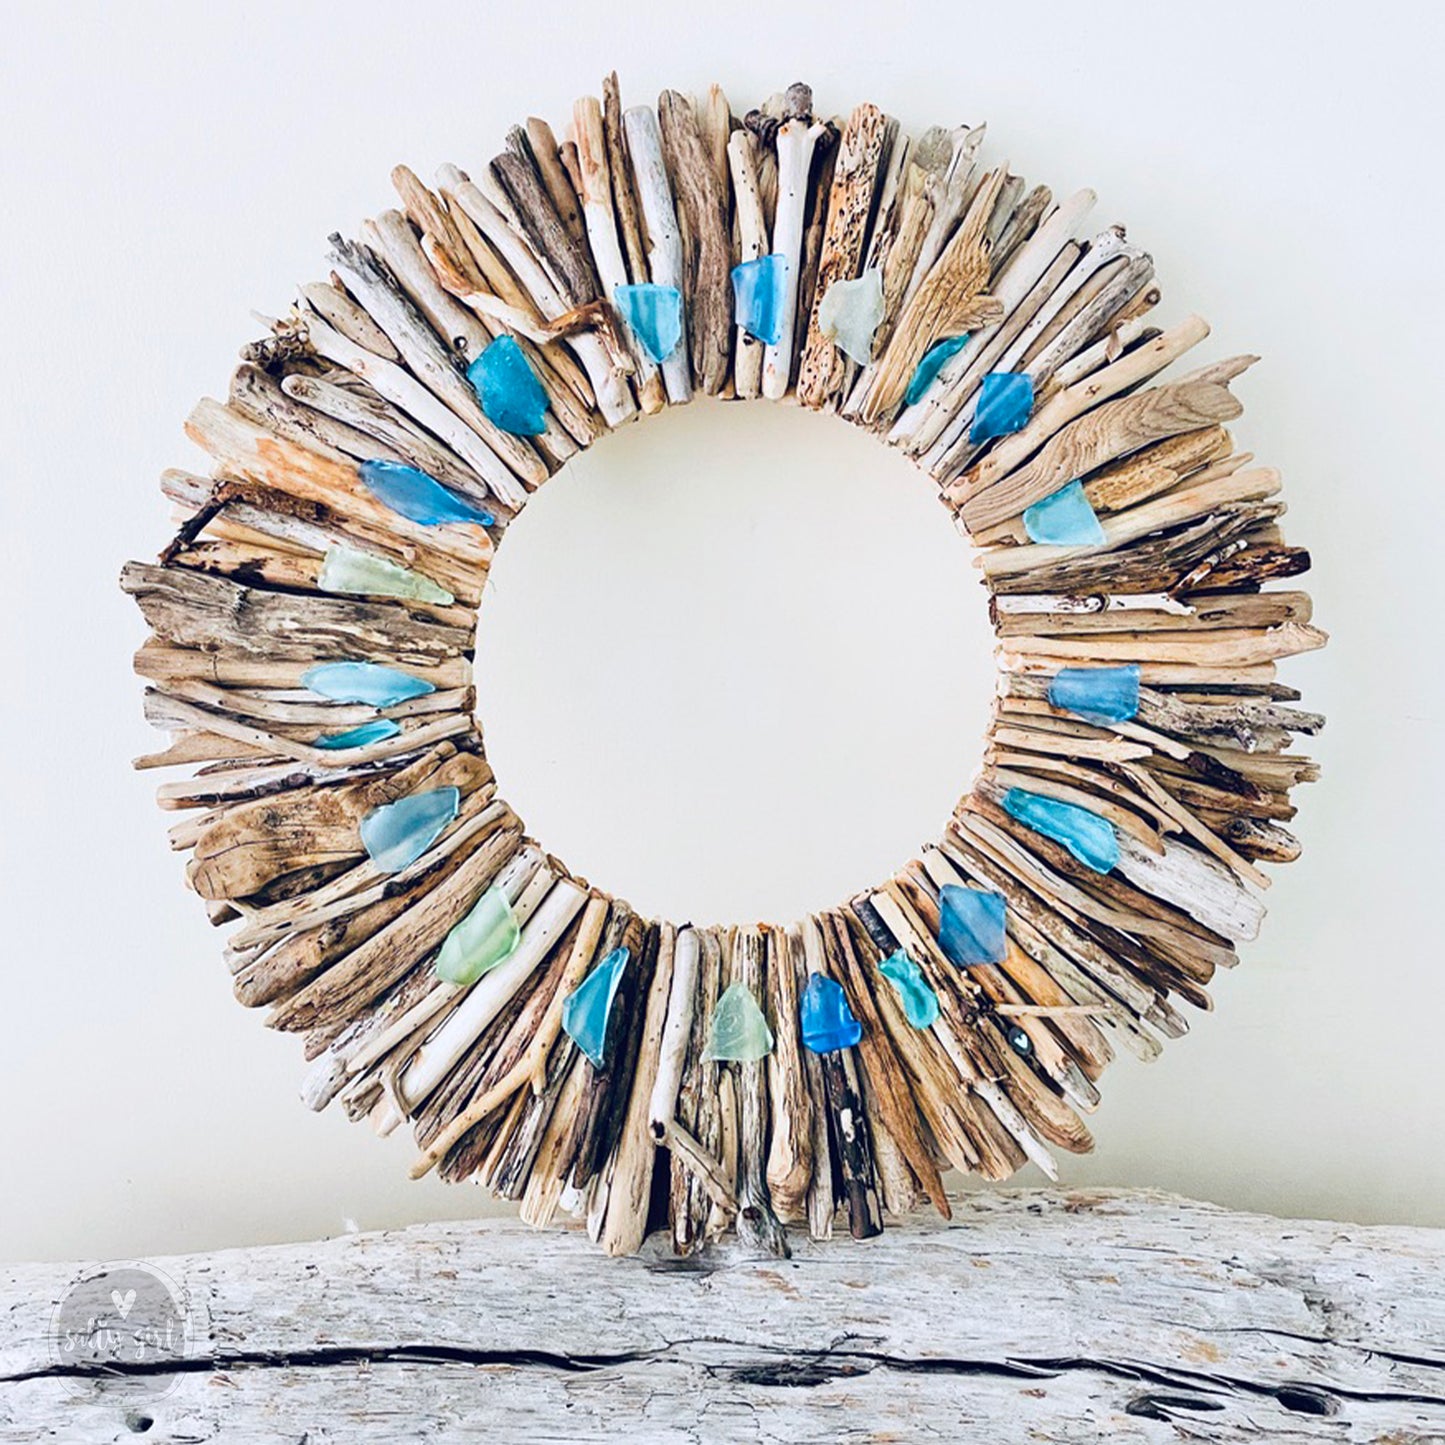 Driftwood Wreath with Aqua Turquoise &  Light Blue Sea Glass Accents 12" - 16" - 20”